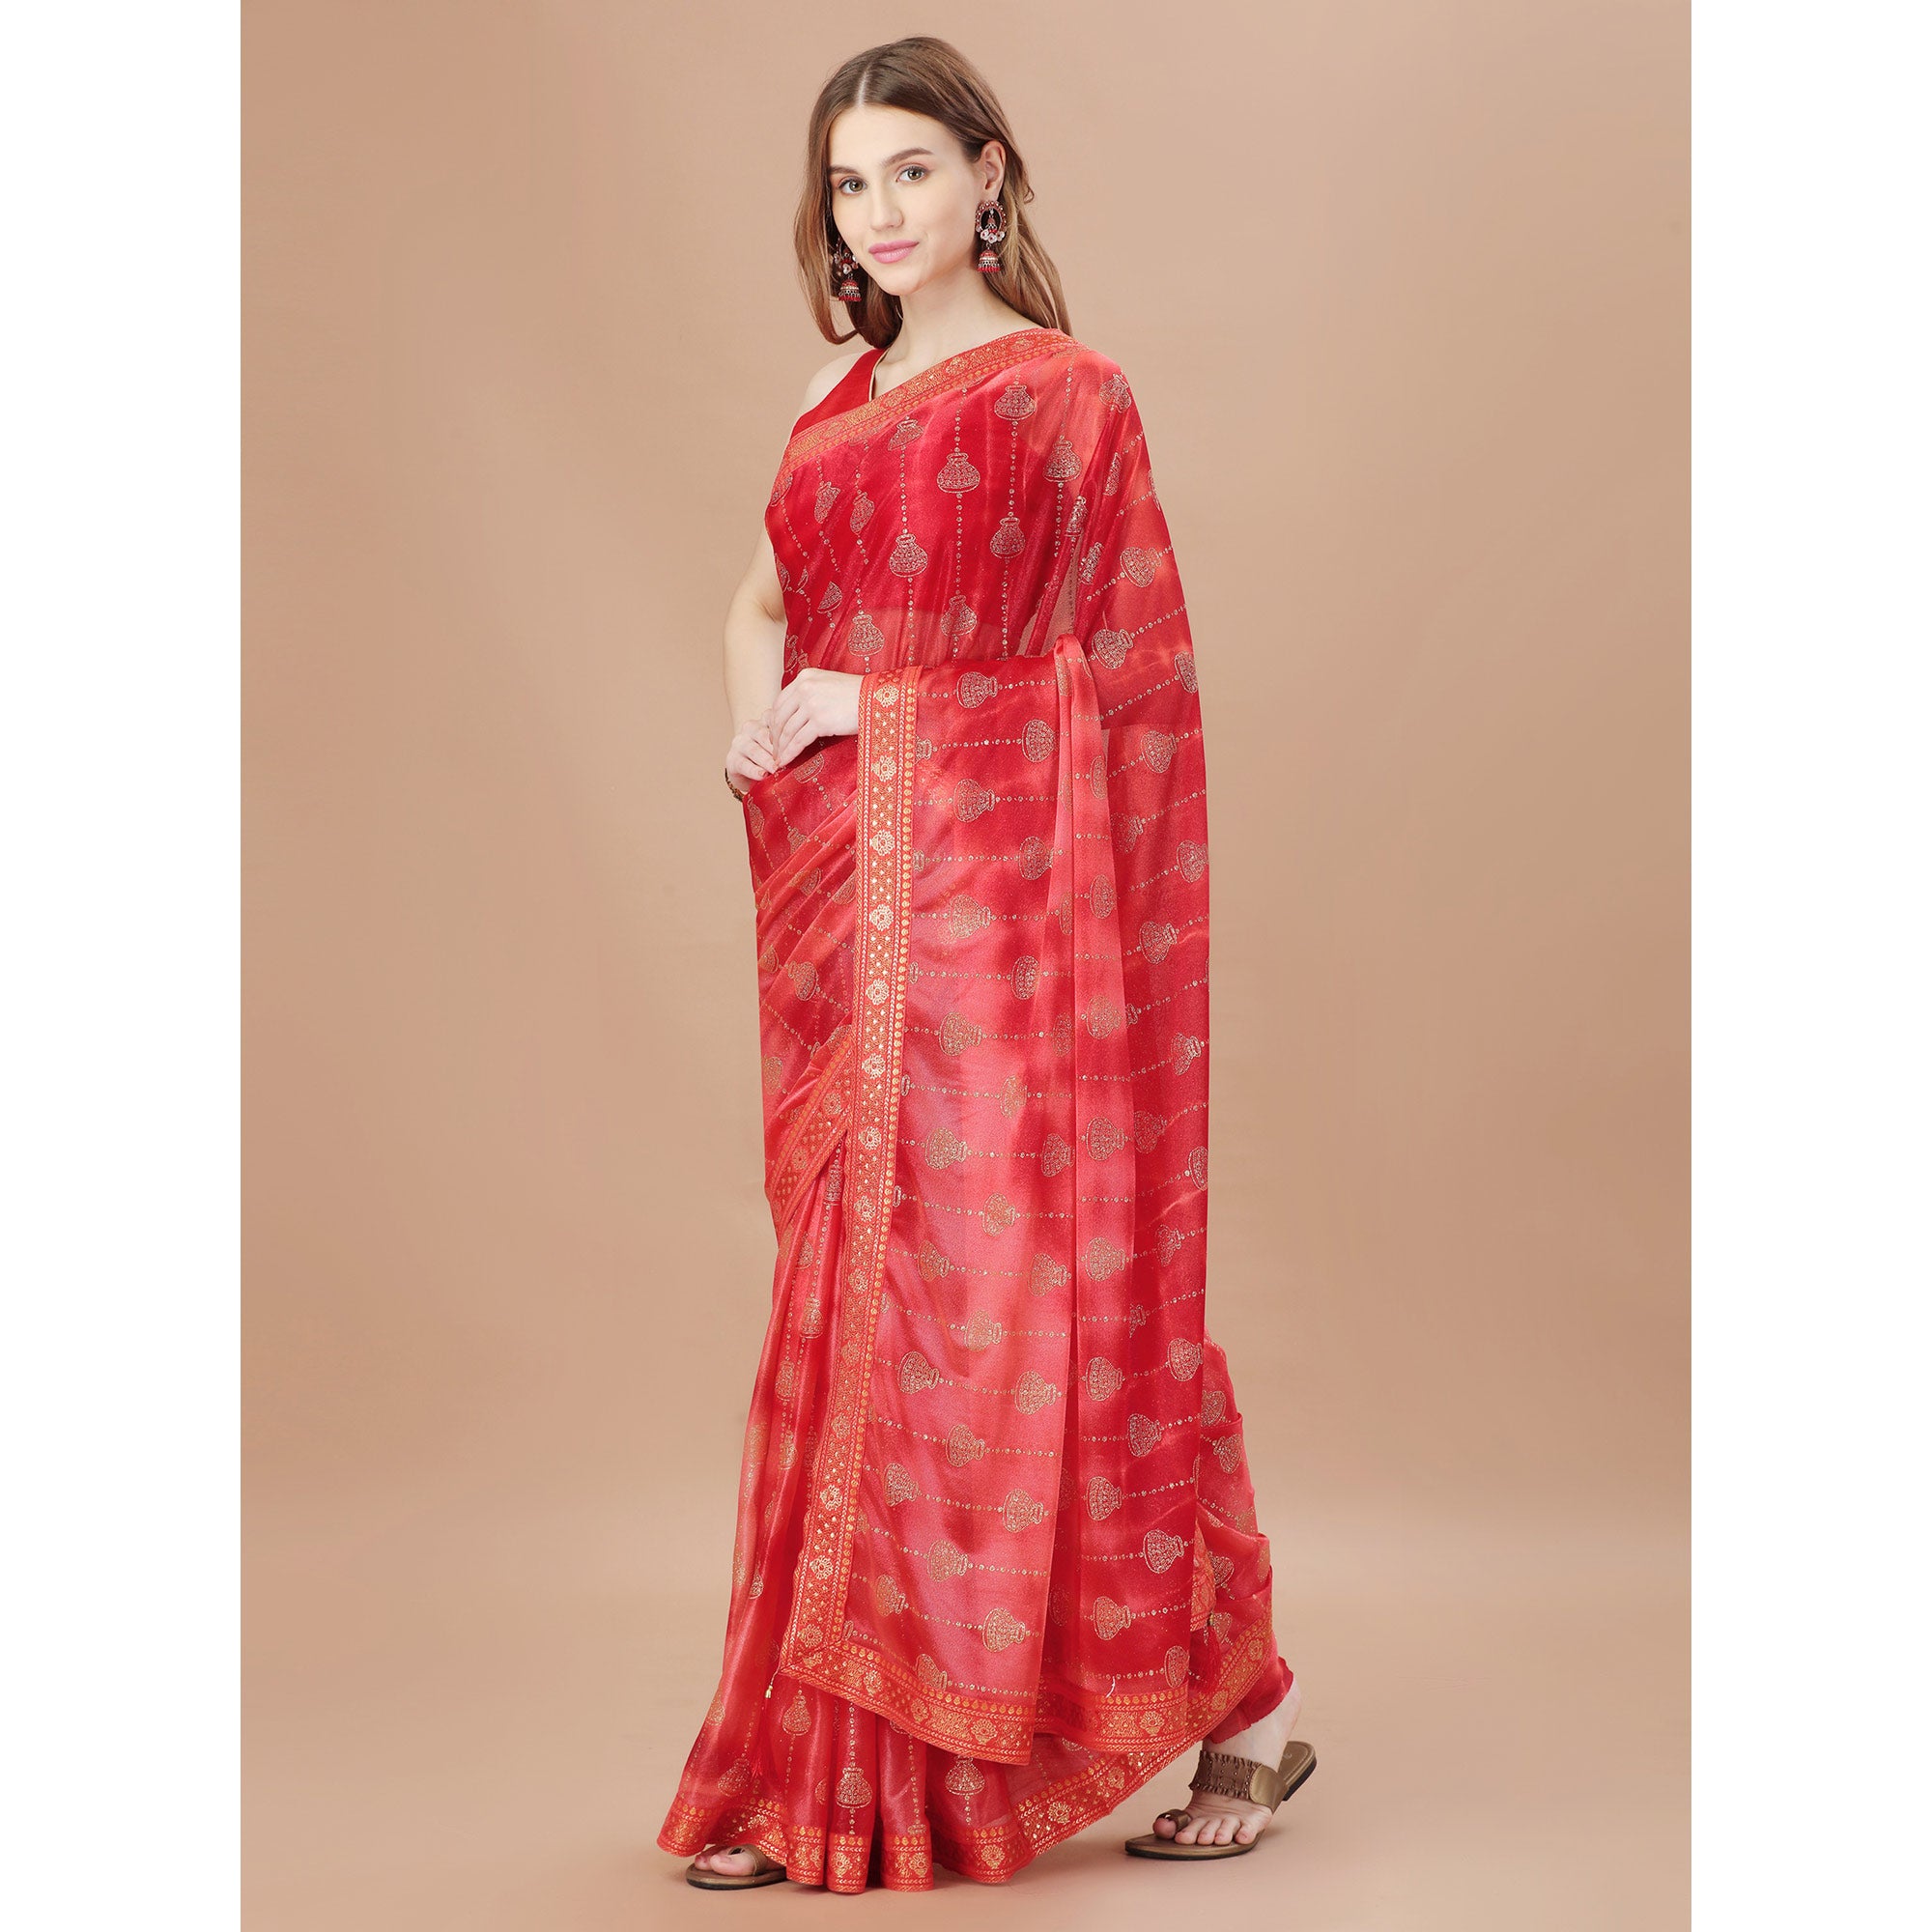 Red Foil Printed Lycra Saree With Lace Border